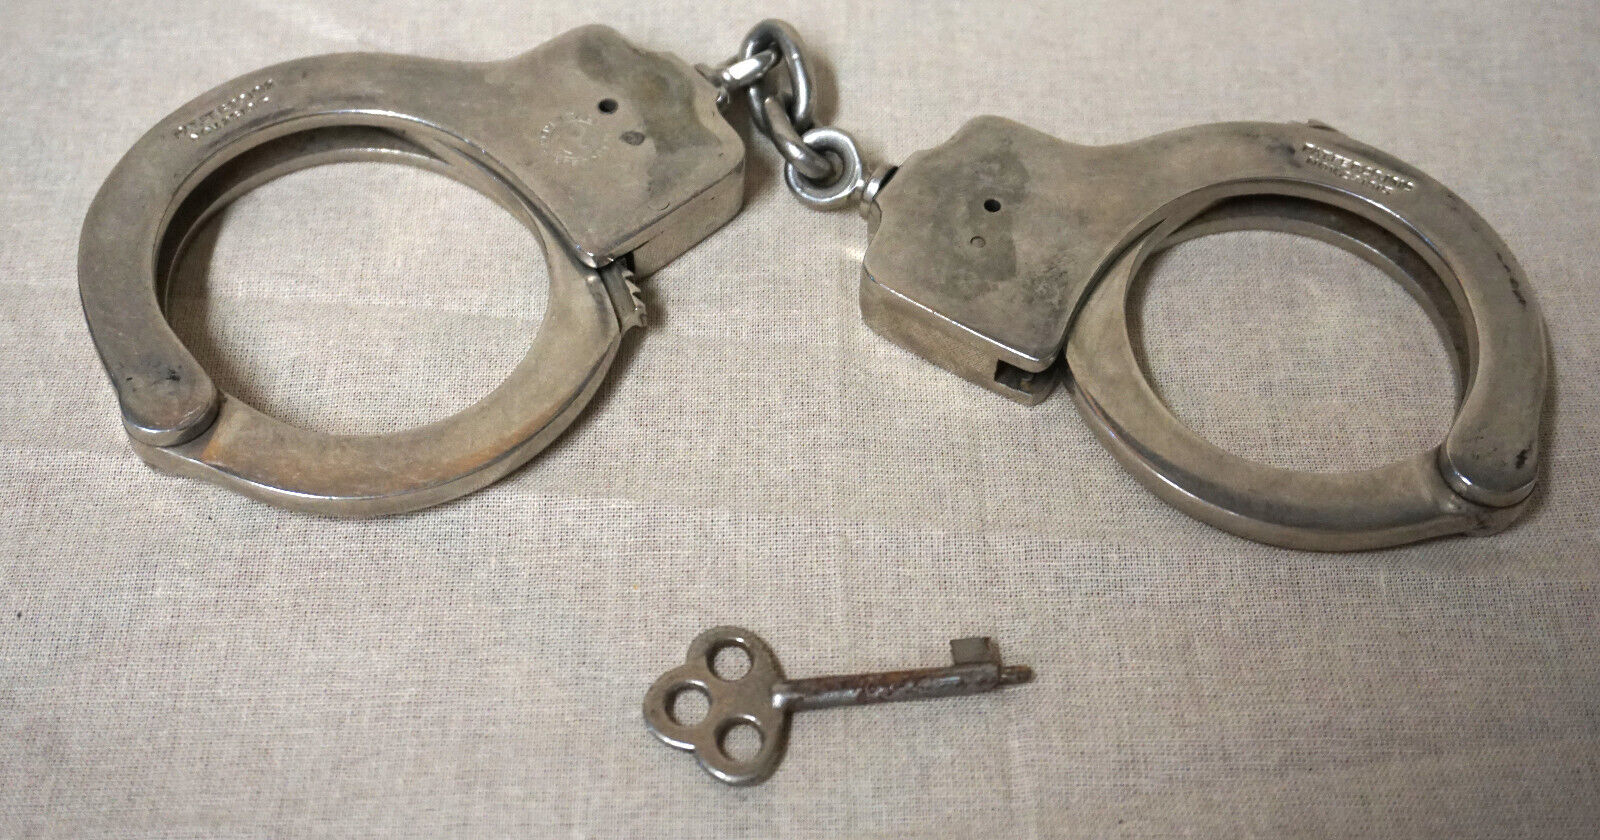 VINTAGE POLICE PEERLESS HANDCUFF HANDCUFFS PAT. 1912 & 1915 With Key